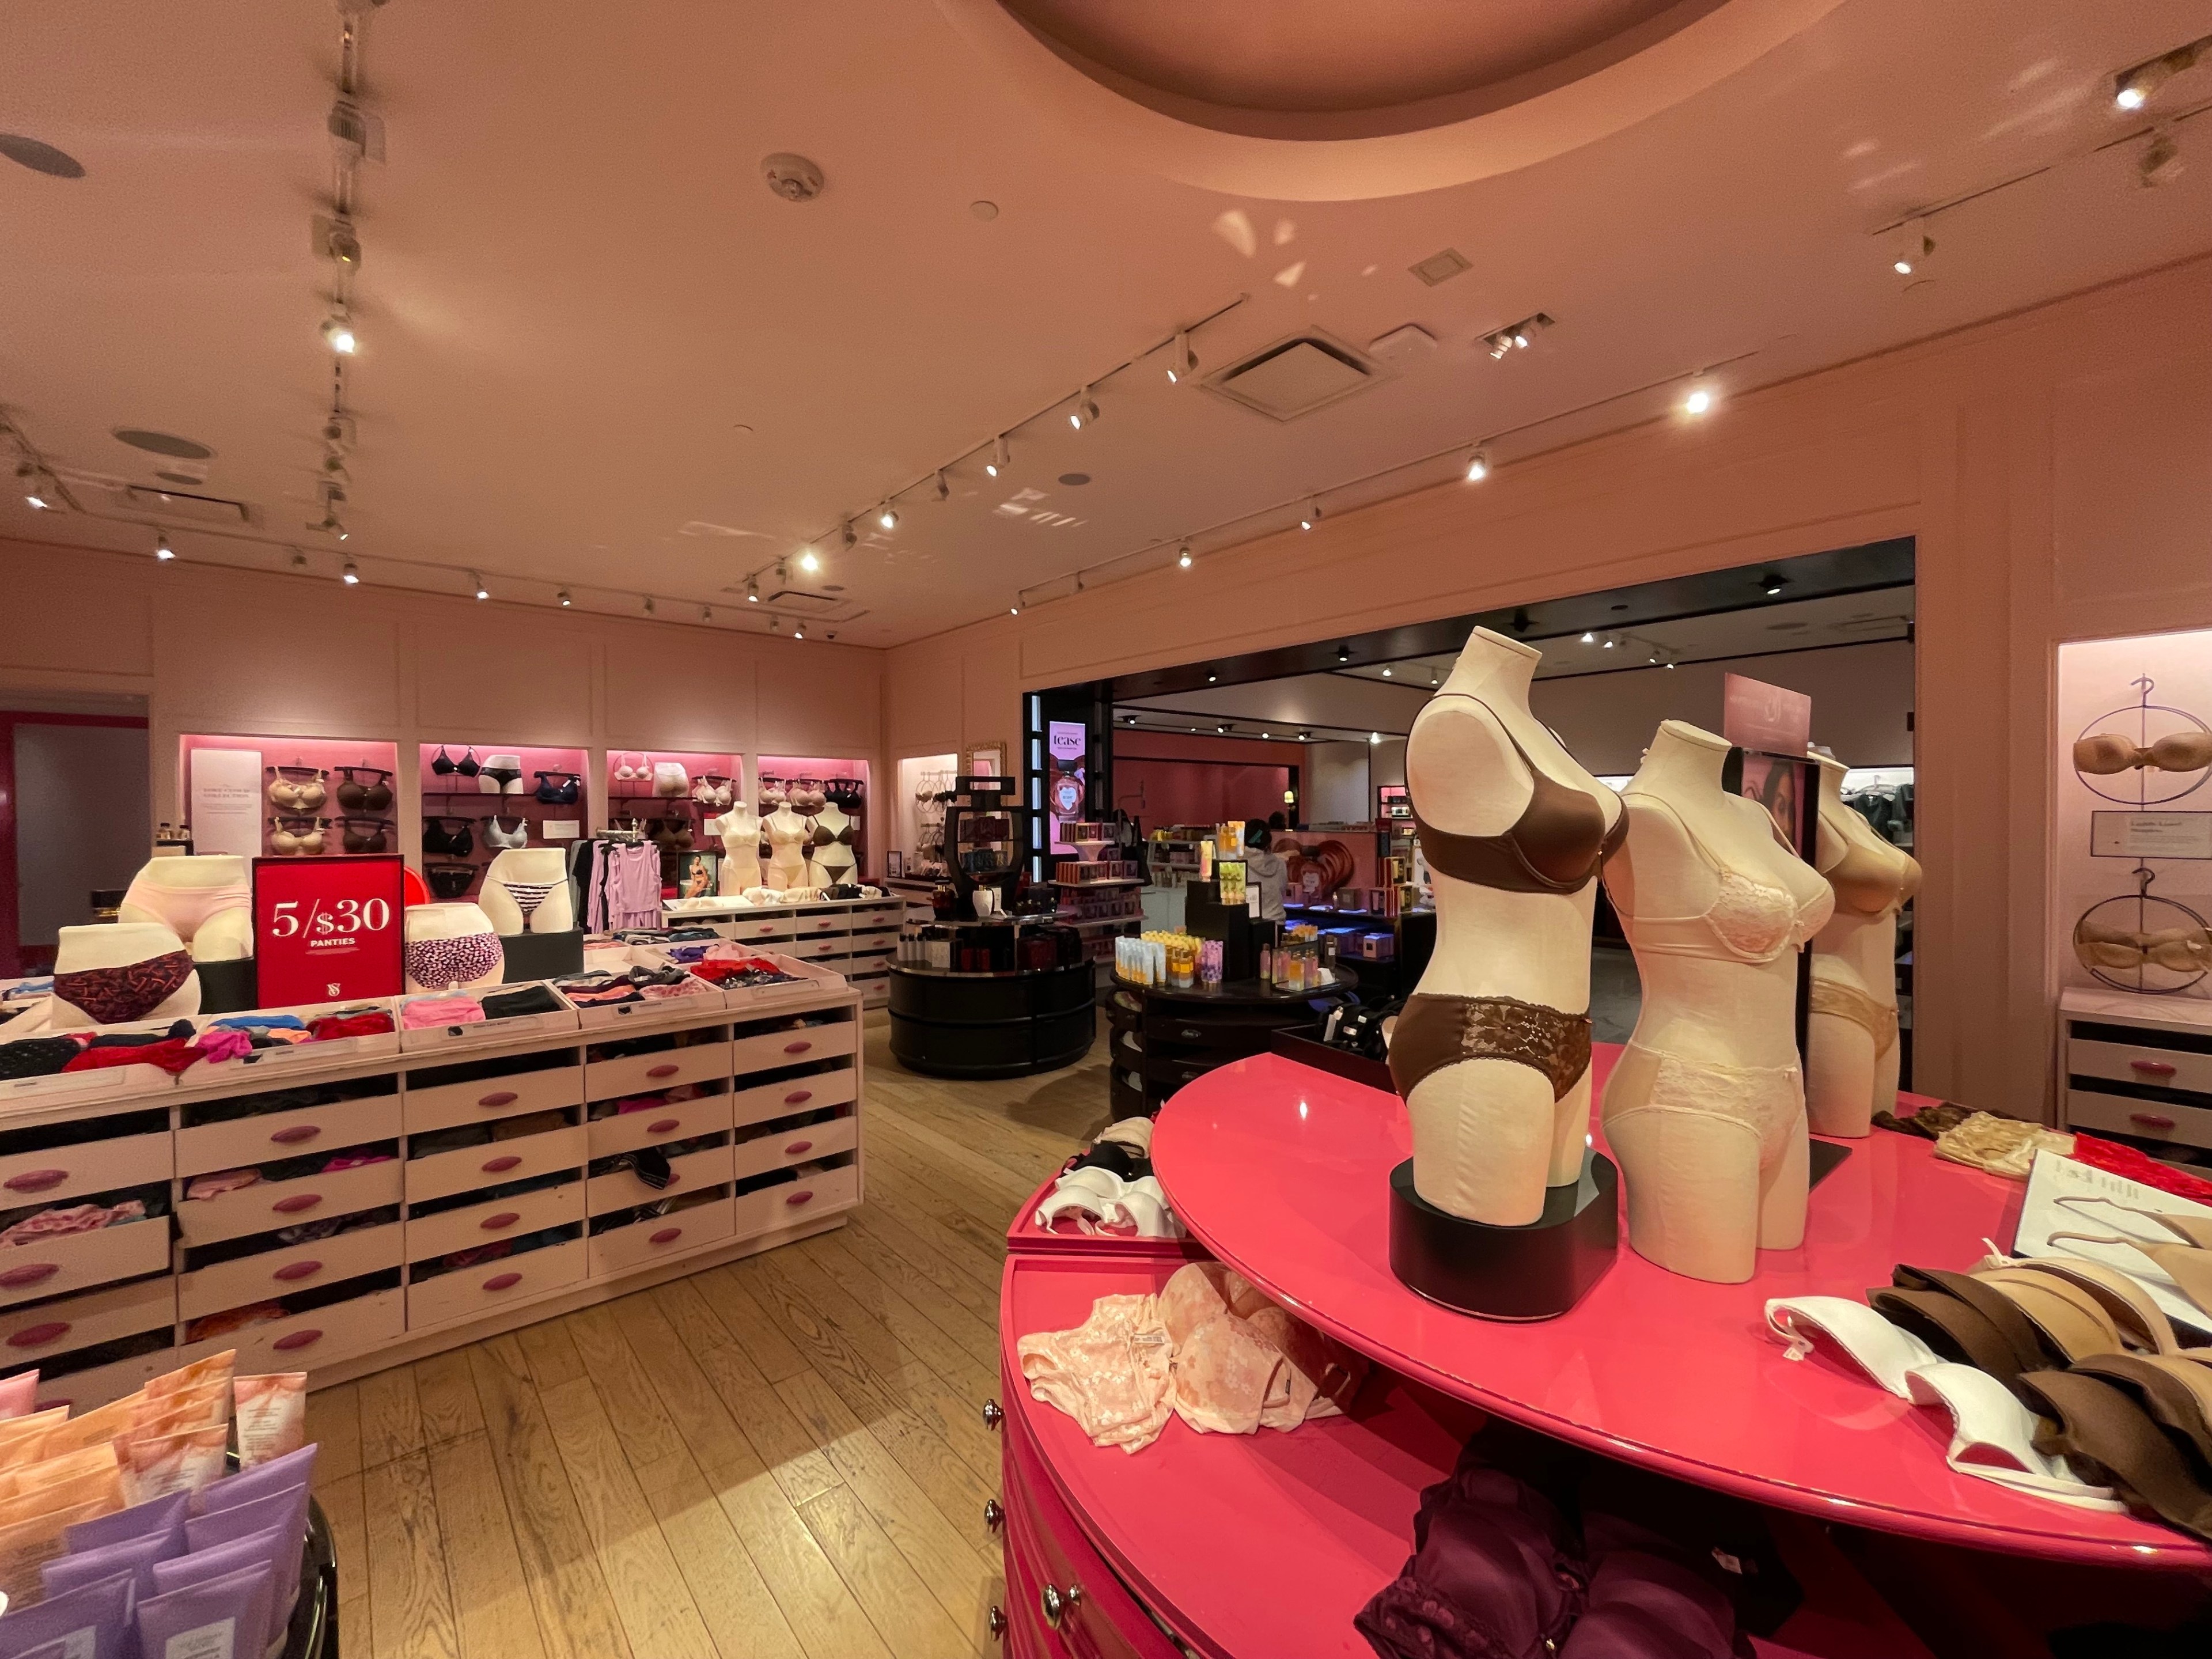 Lingerie is displayed inside a Victoria's Secret store.